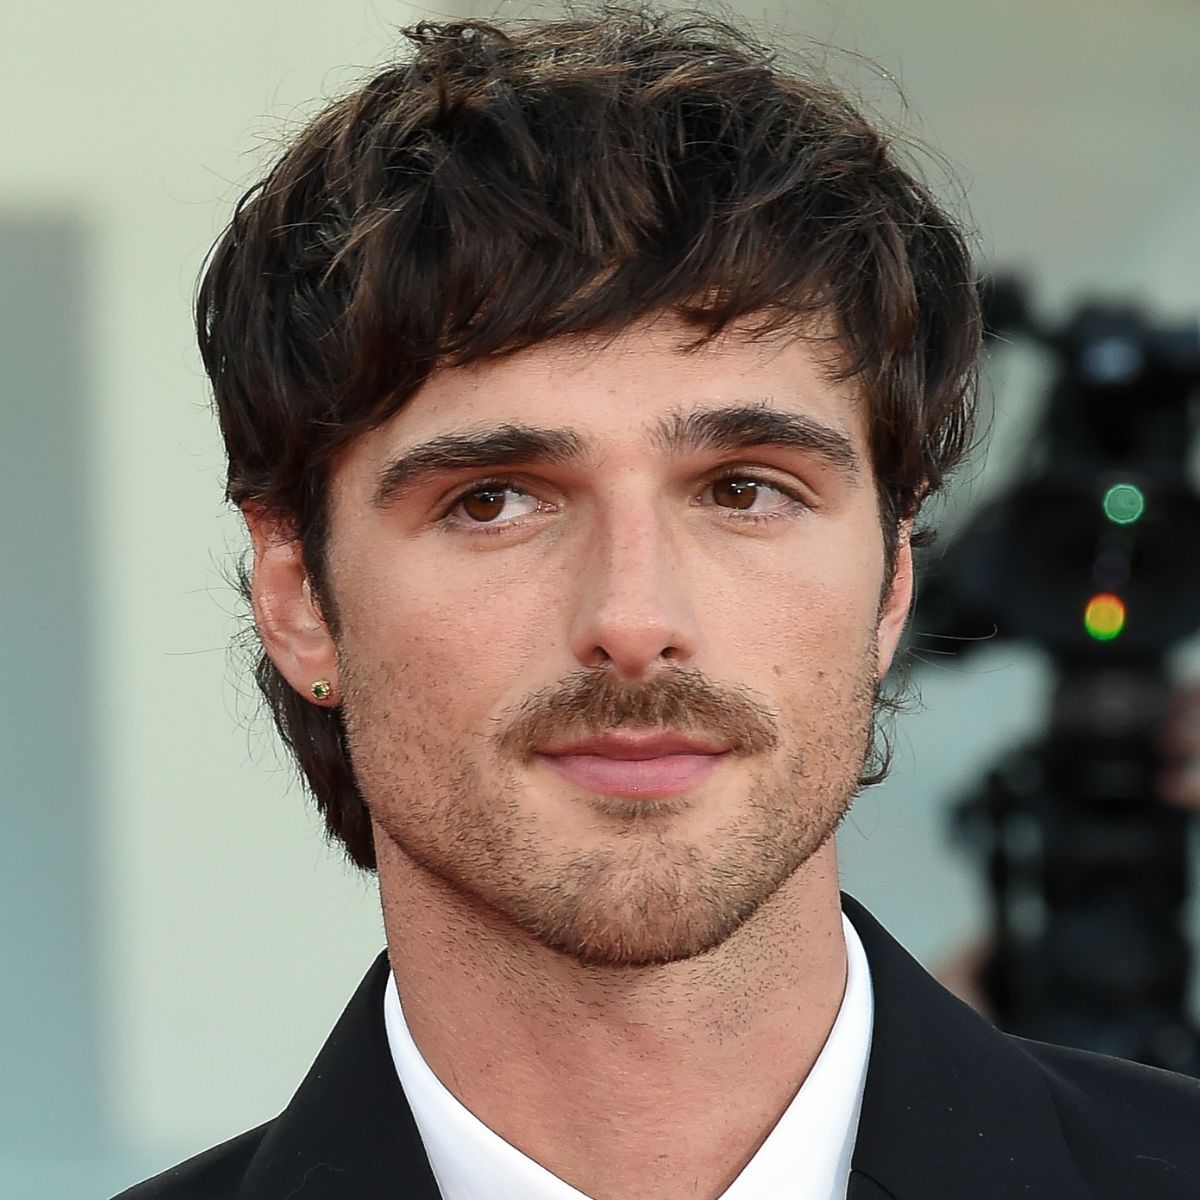 Jacob Elordi: Tousled Textured Hairstyle With Thick Fringe